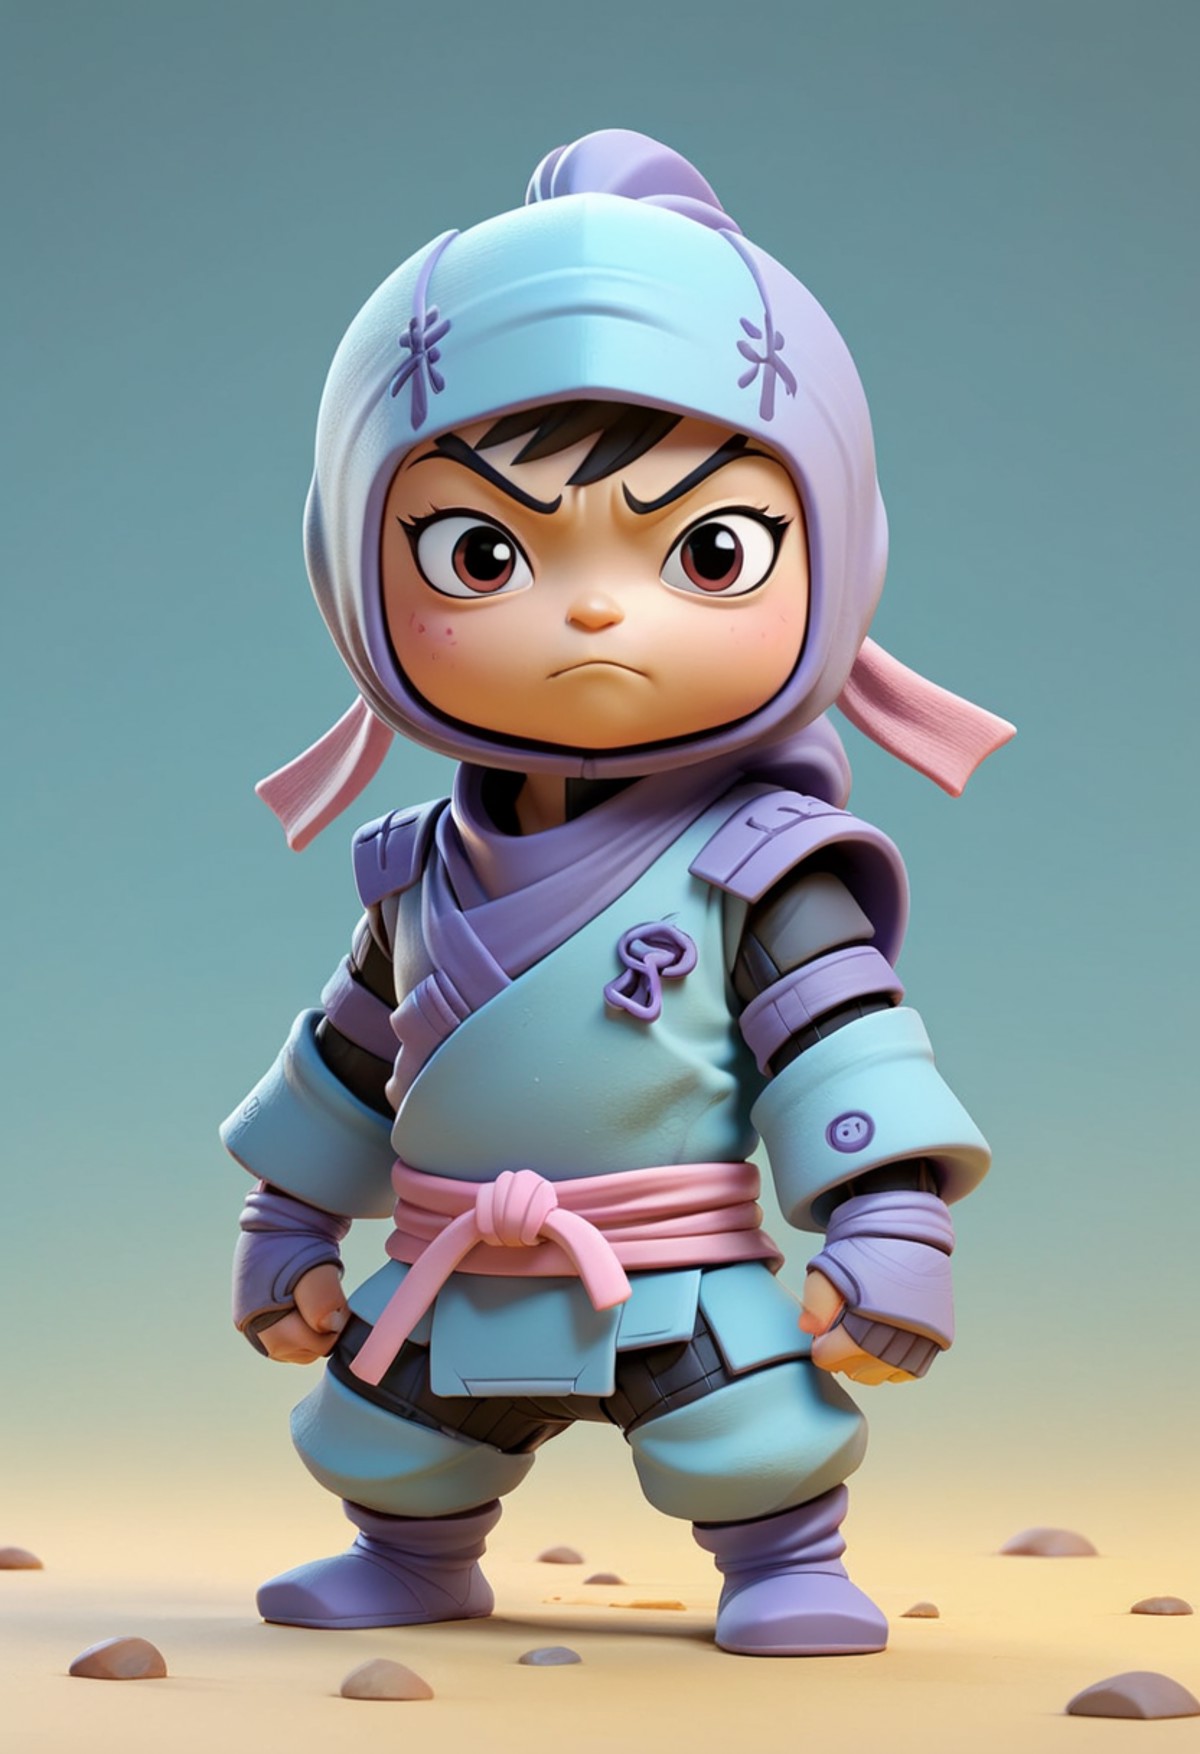 Tiny cute ninja toy, standing character, soft smooth lighting, soft pastel colors, skottie young, 3d blender render, polyc...